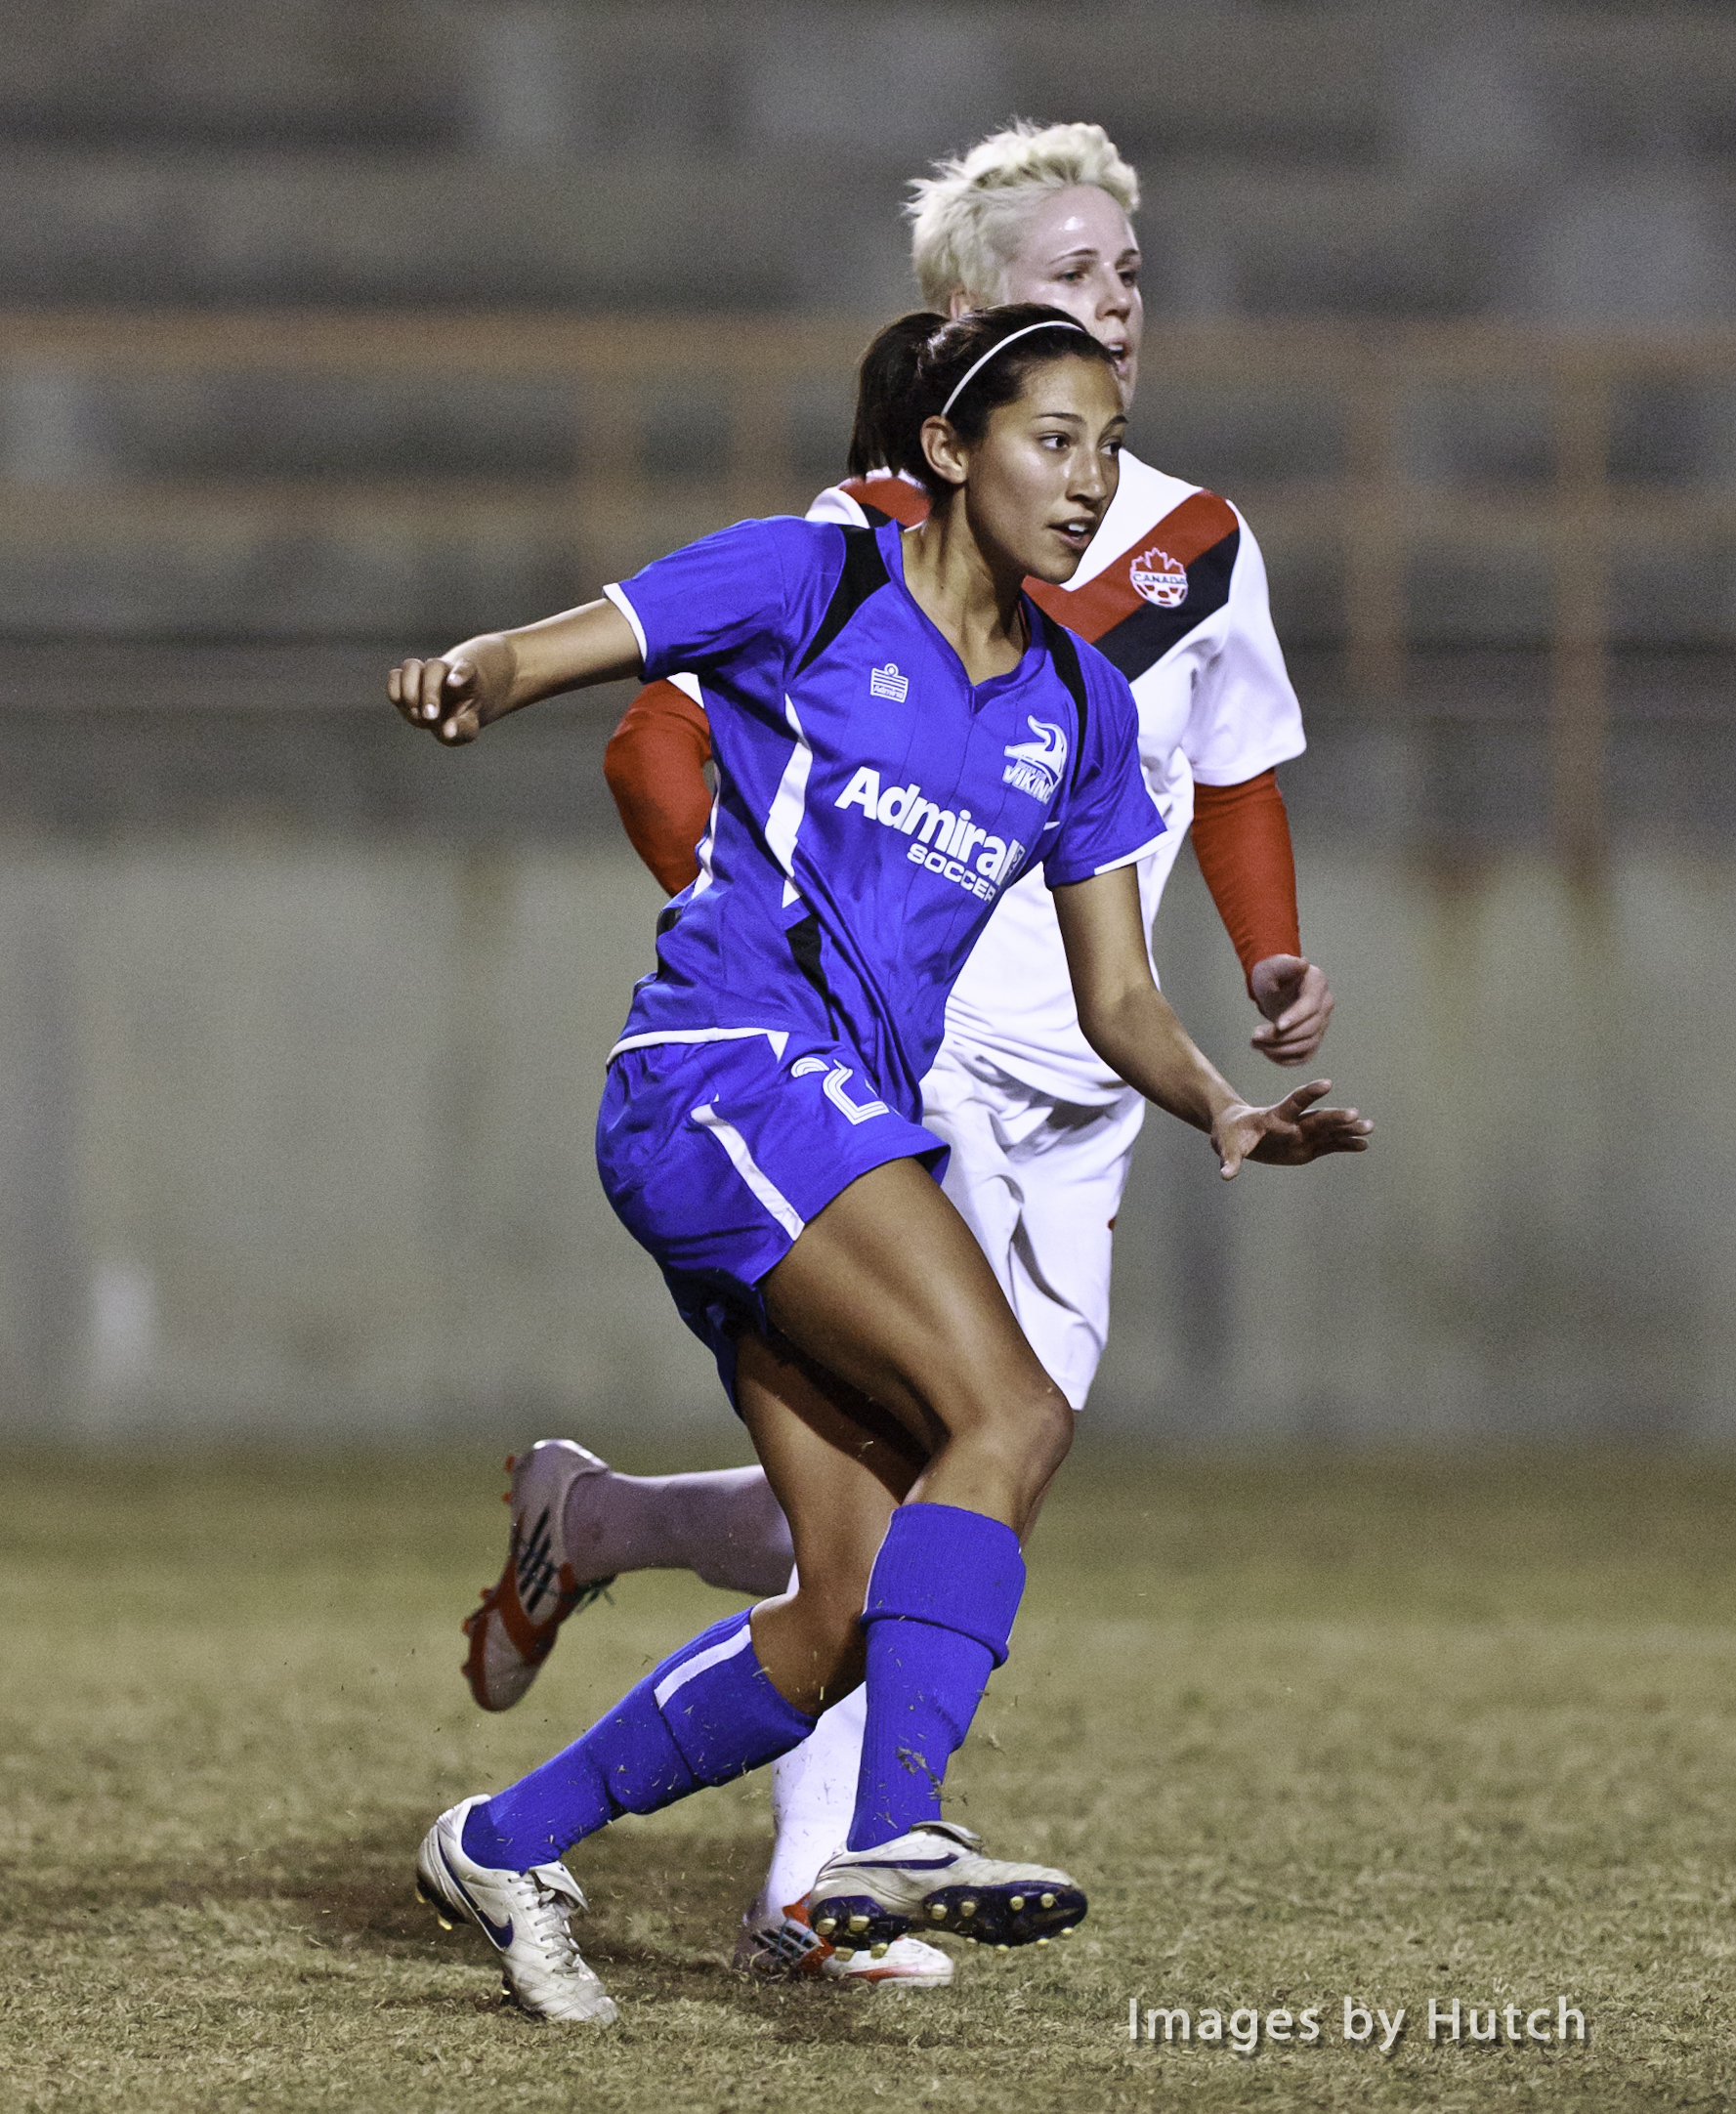 Christen Press Playing for the LA Vikings